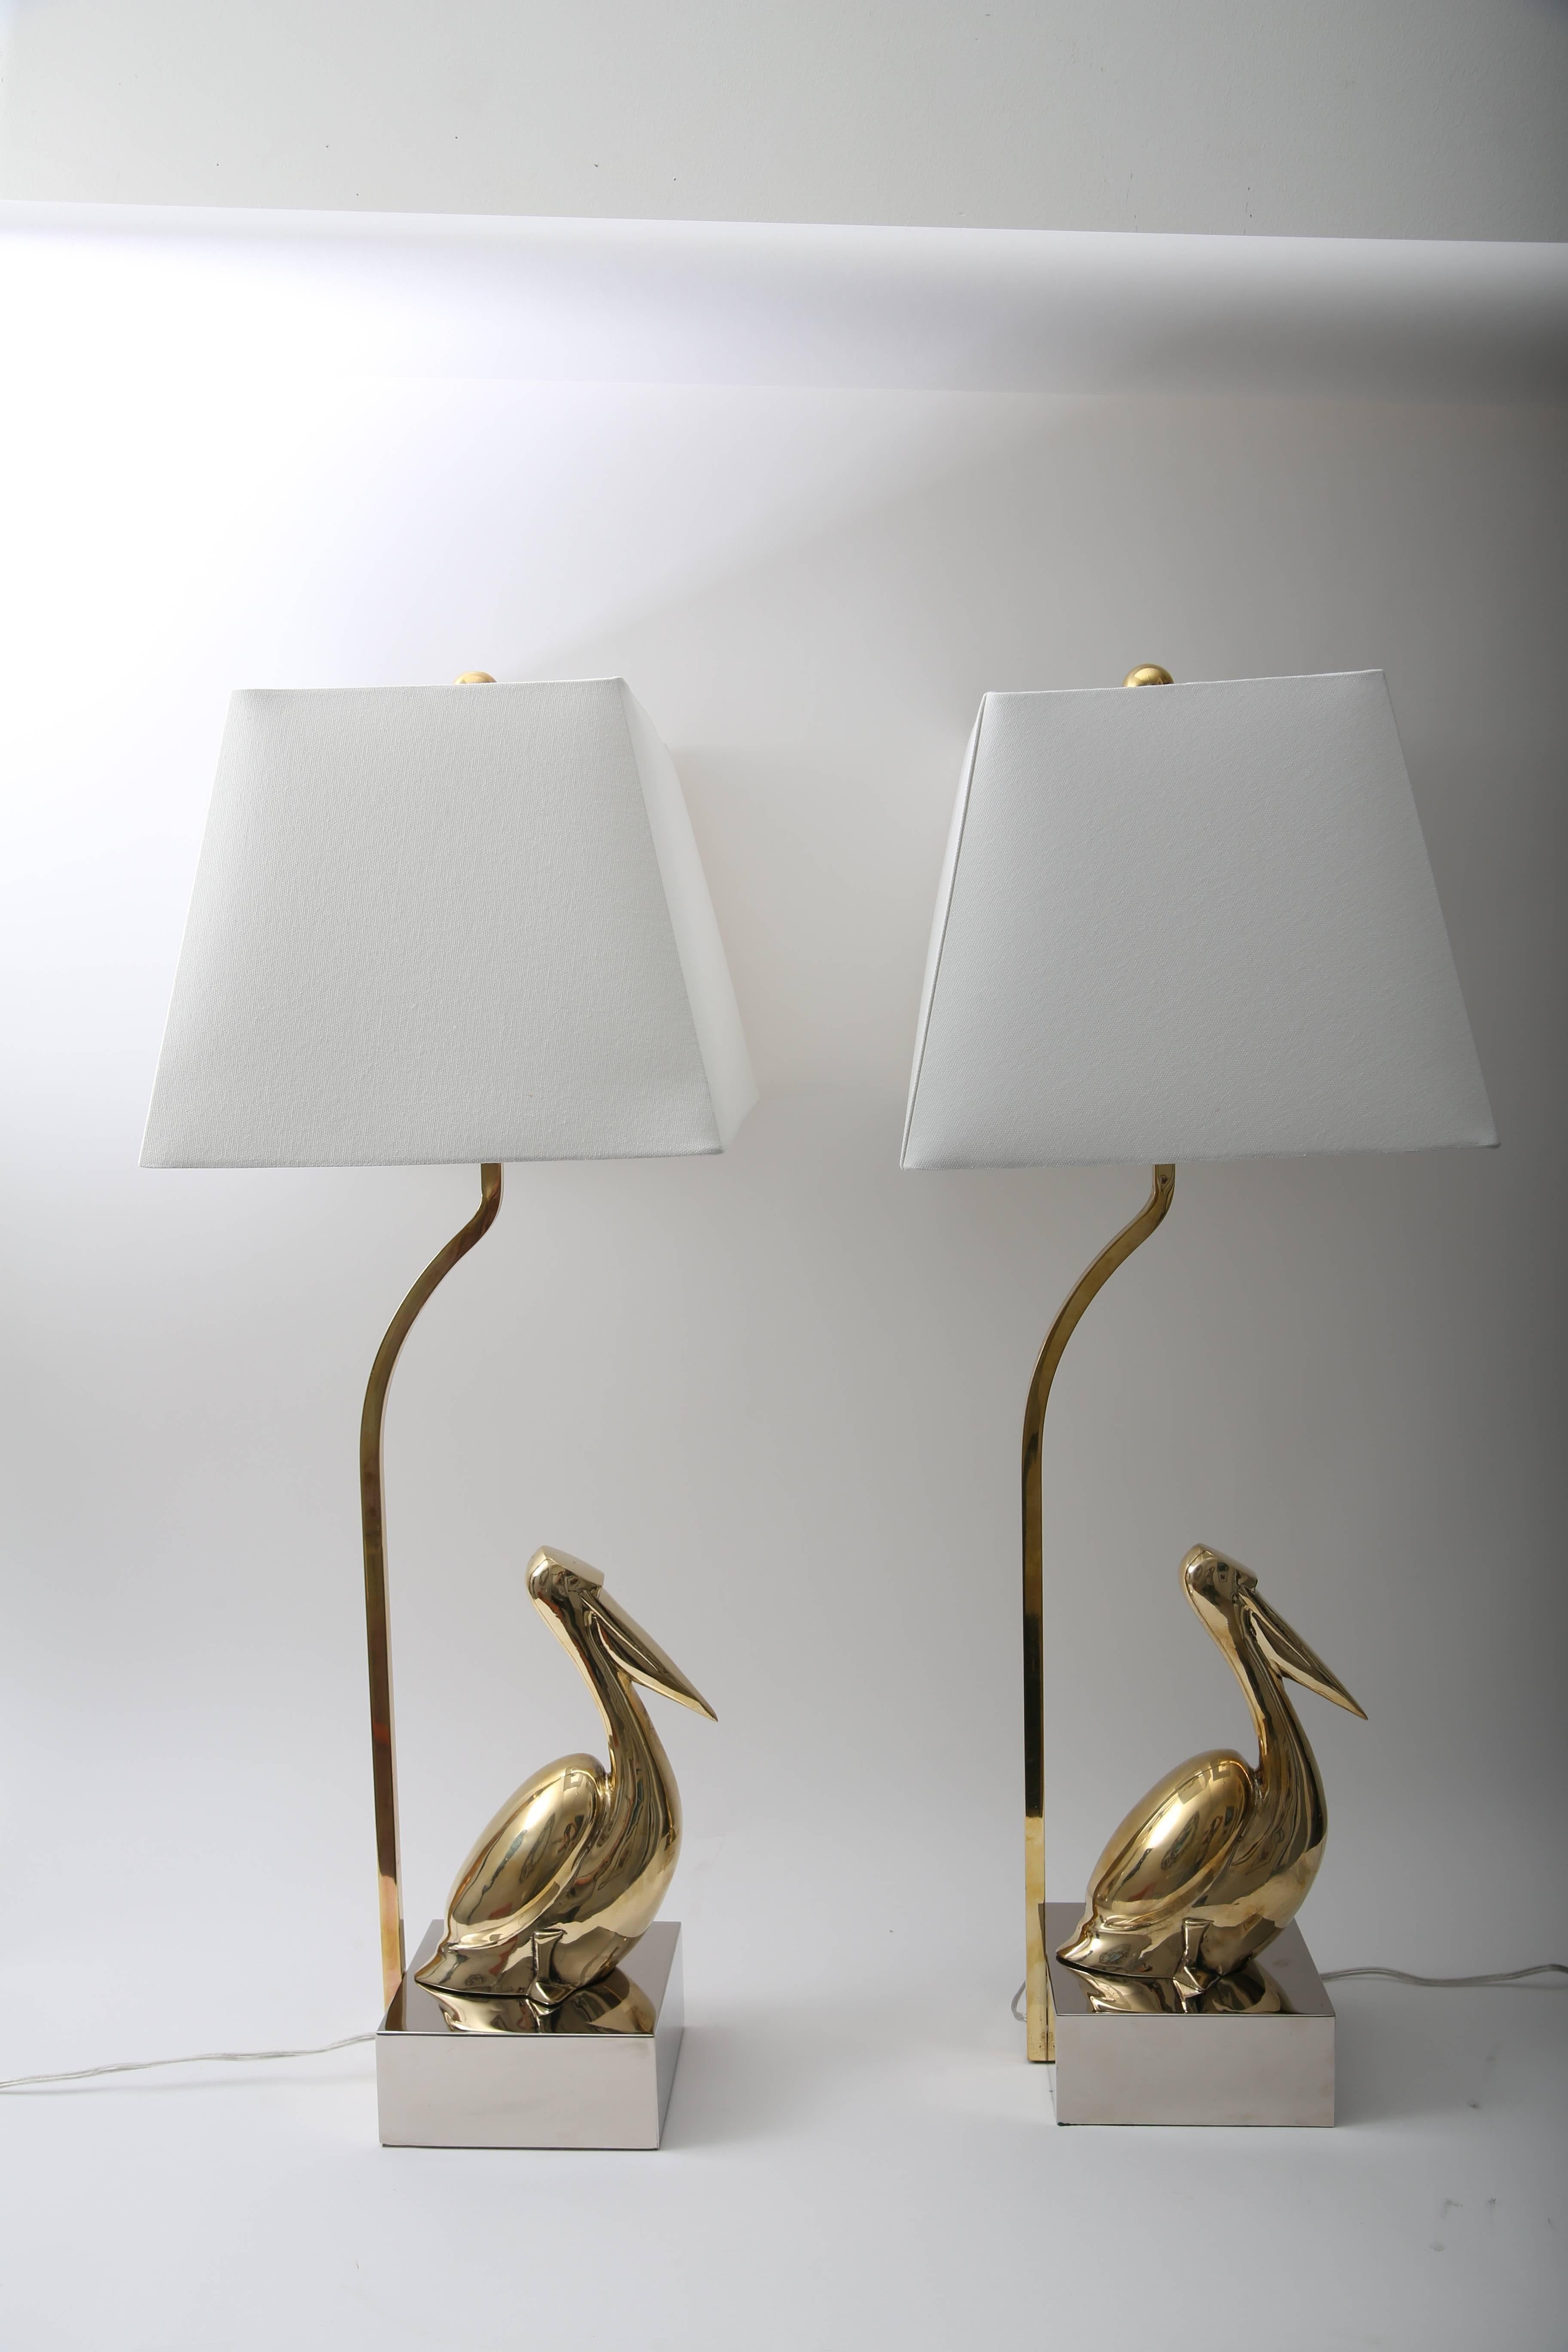 Polished Pair of American Art Deco Style Table Lamps with Stylized Figural Pelicans